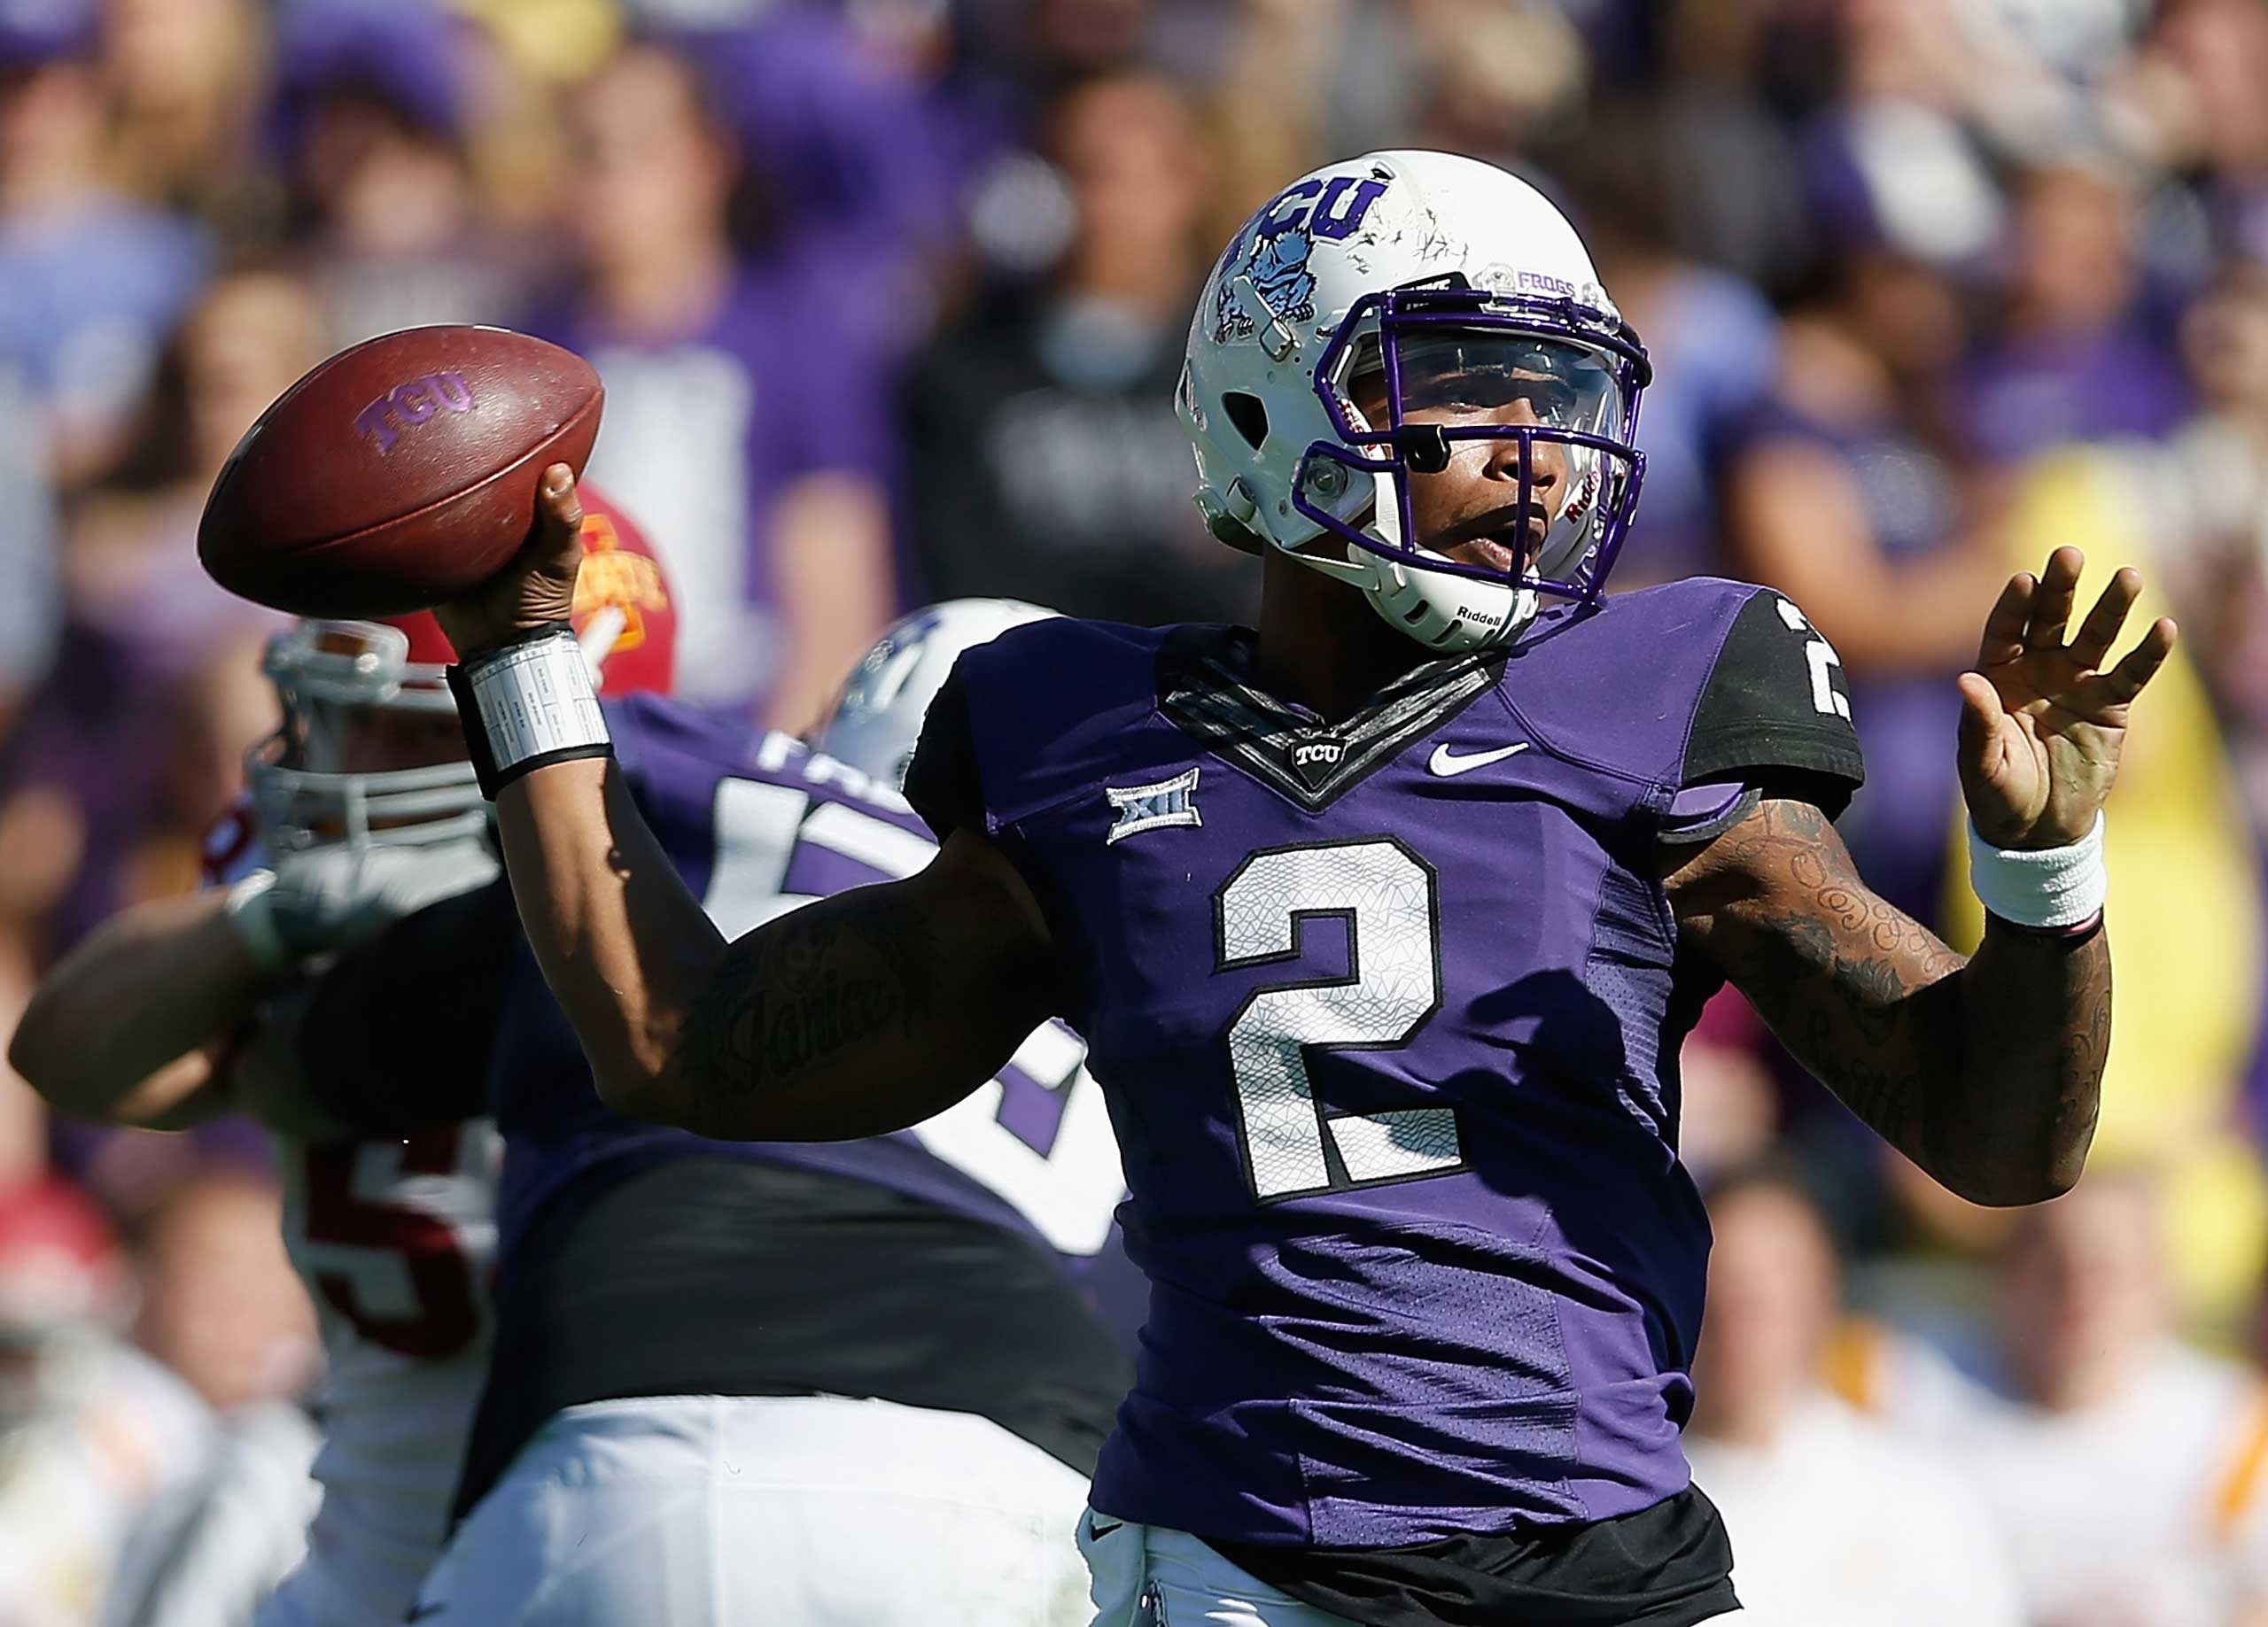 Texas Christian University Quarterback Trevone Boykin throws a pass during the thrid quarter of the Big 12 college football game against the Iowa State Cyclones at Amon G. Carter Stadium on Dec. 6, 2014 in Fort Worth, Texas. (Christian Petersen—Getty Images)